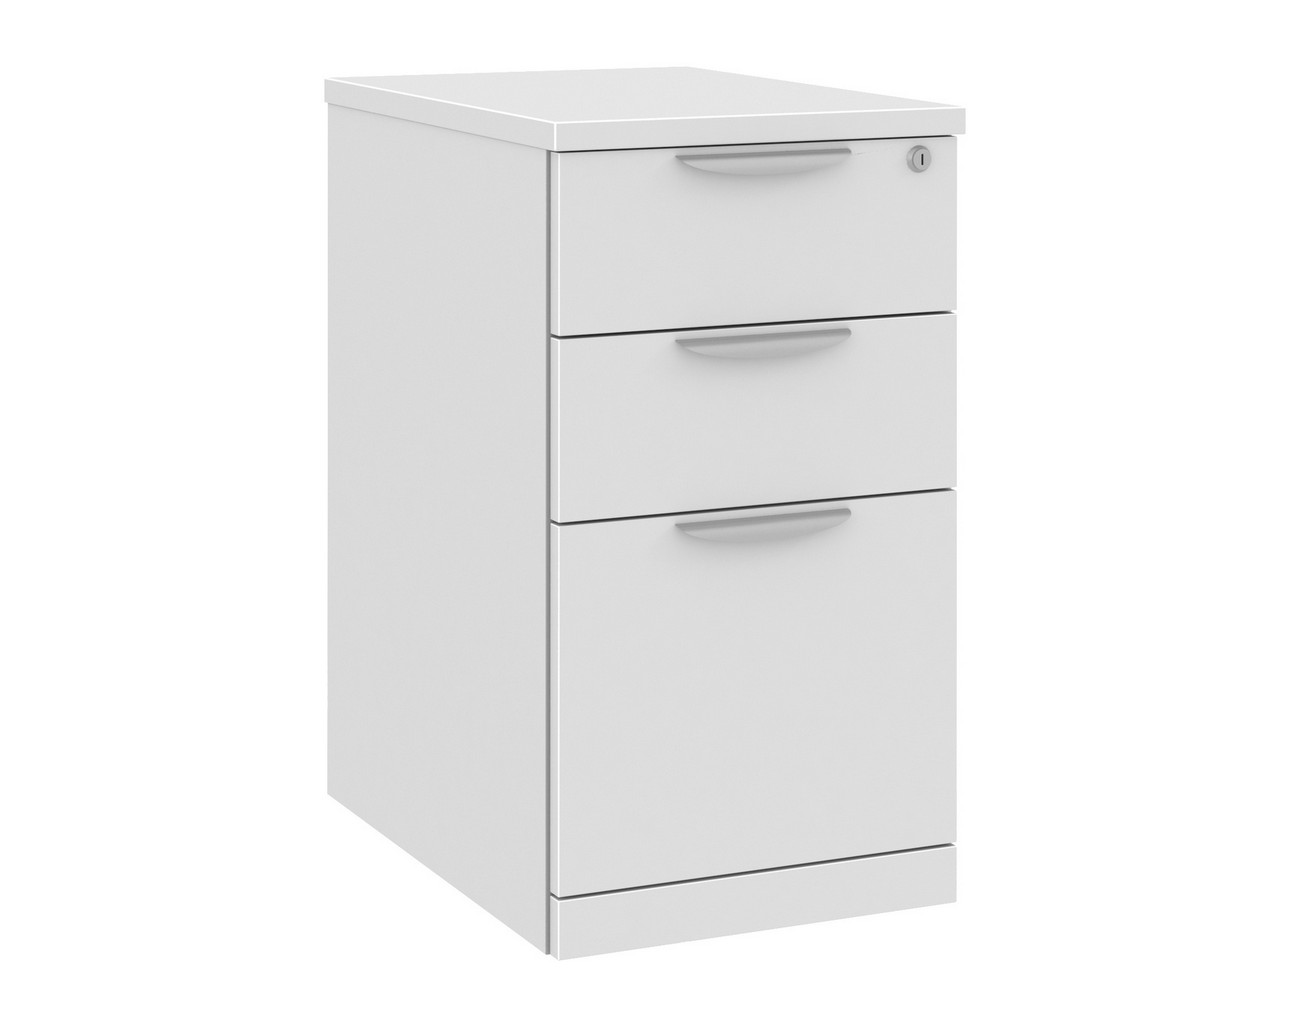 Classic Locking Mobile Pedestals – 3 Drawer in White